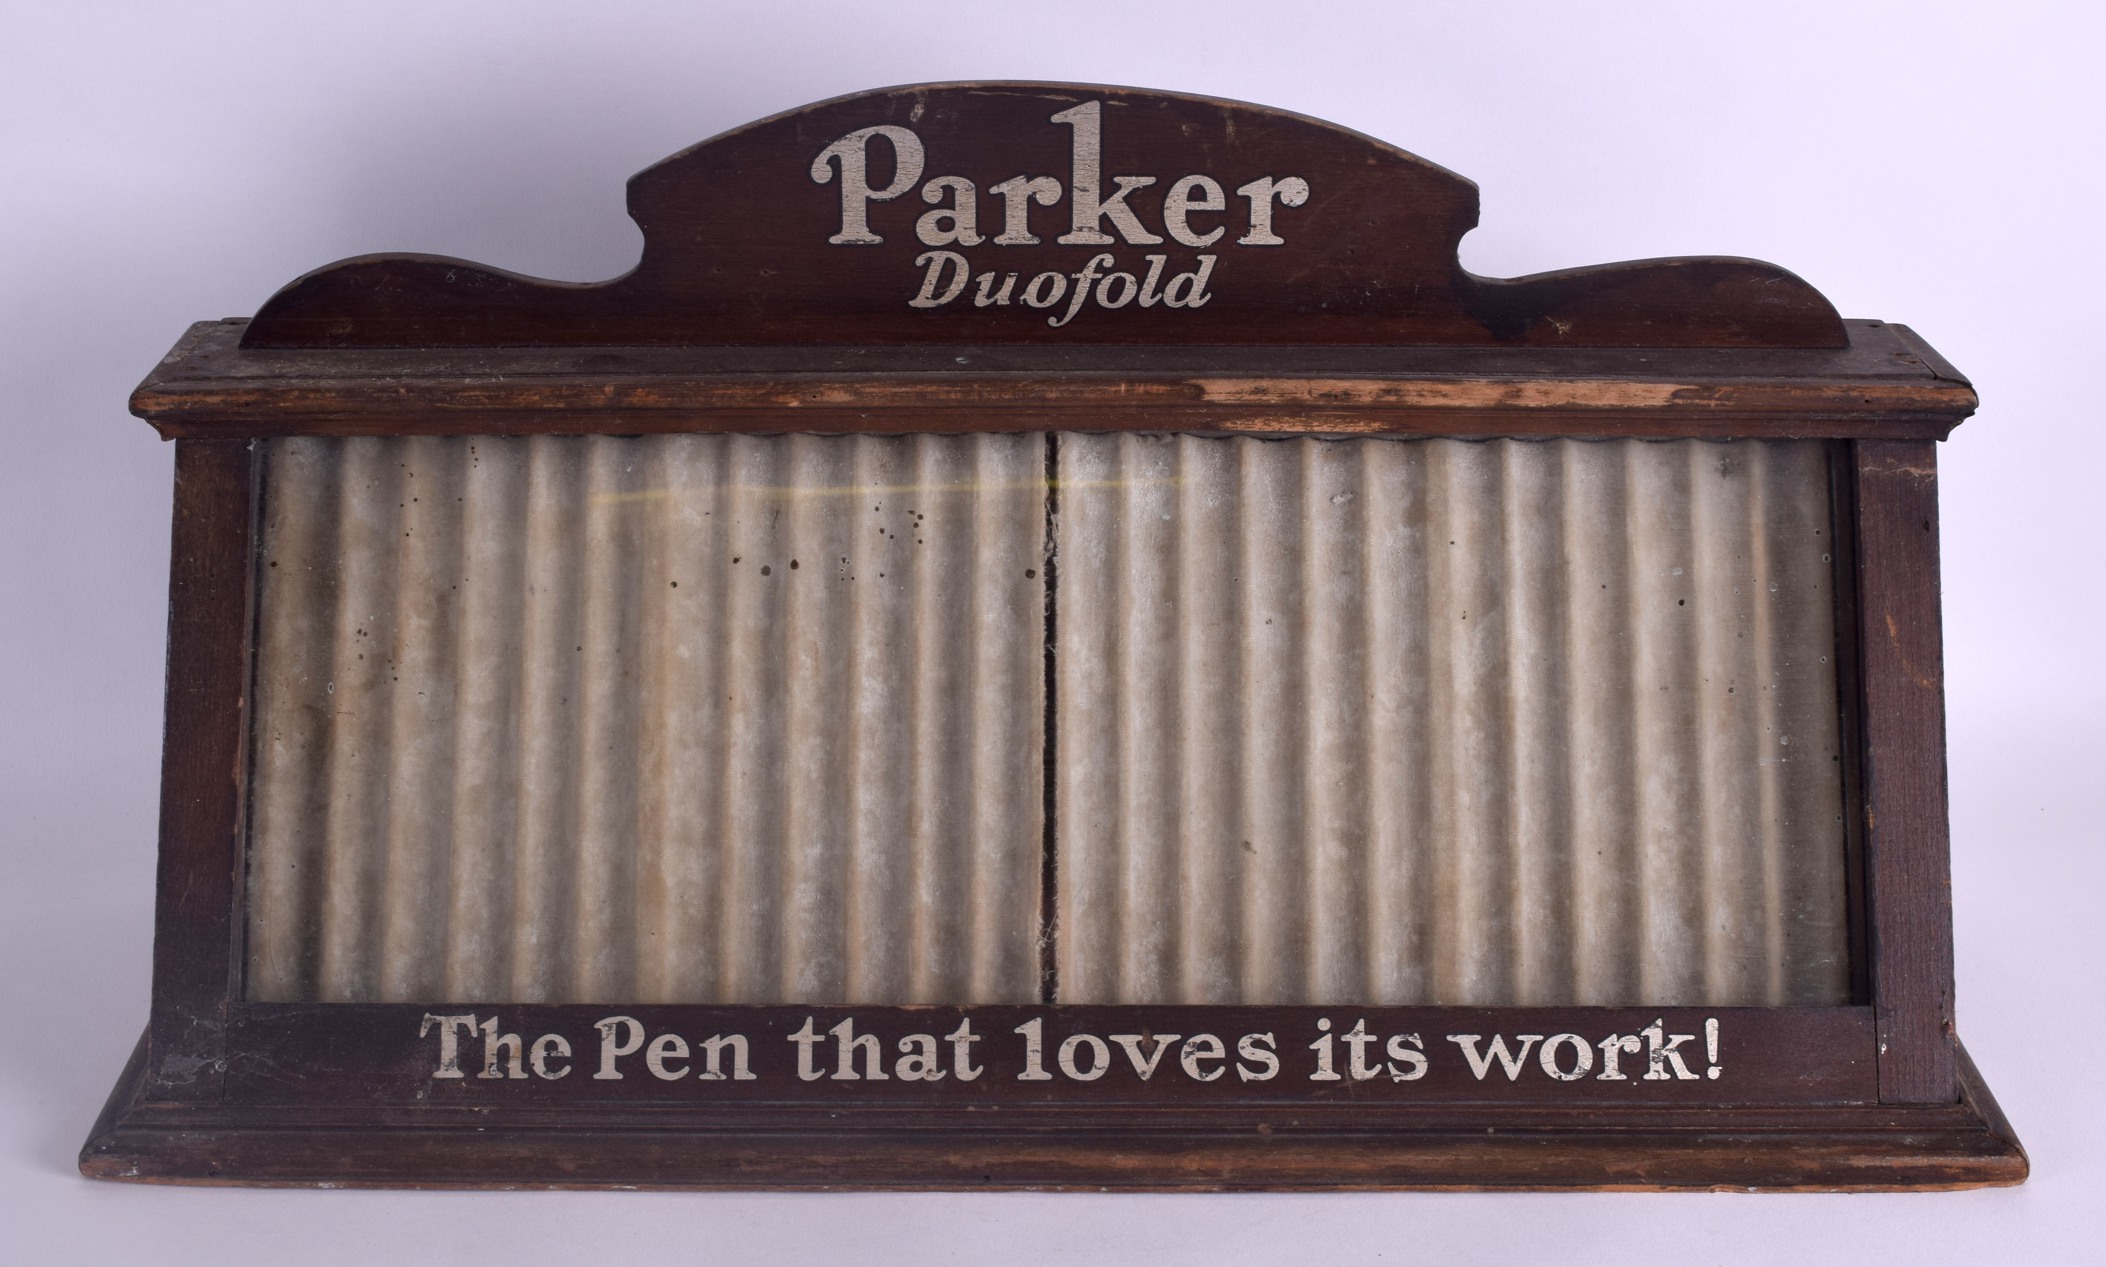 A VINTAGE PARKER DUOFOLD COUNTER TOP PEN DISPLAY CABINET with original silver painted advertising.